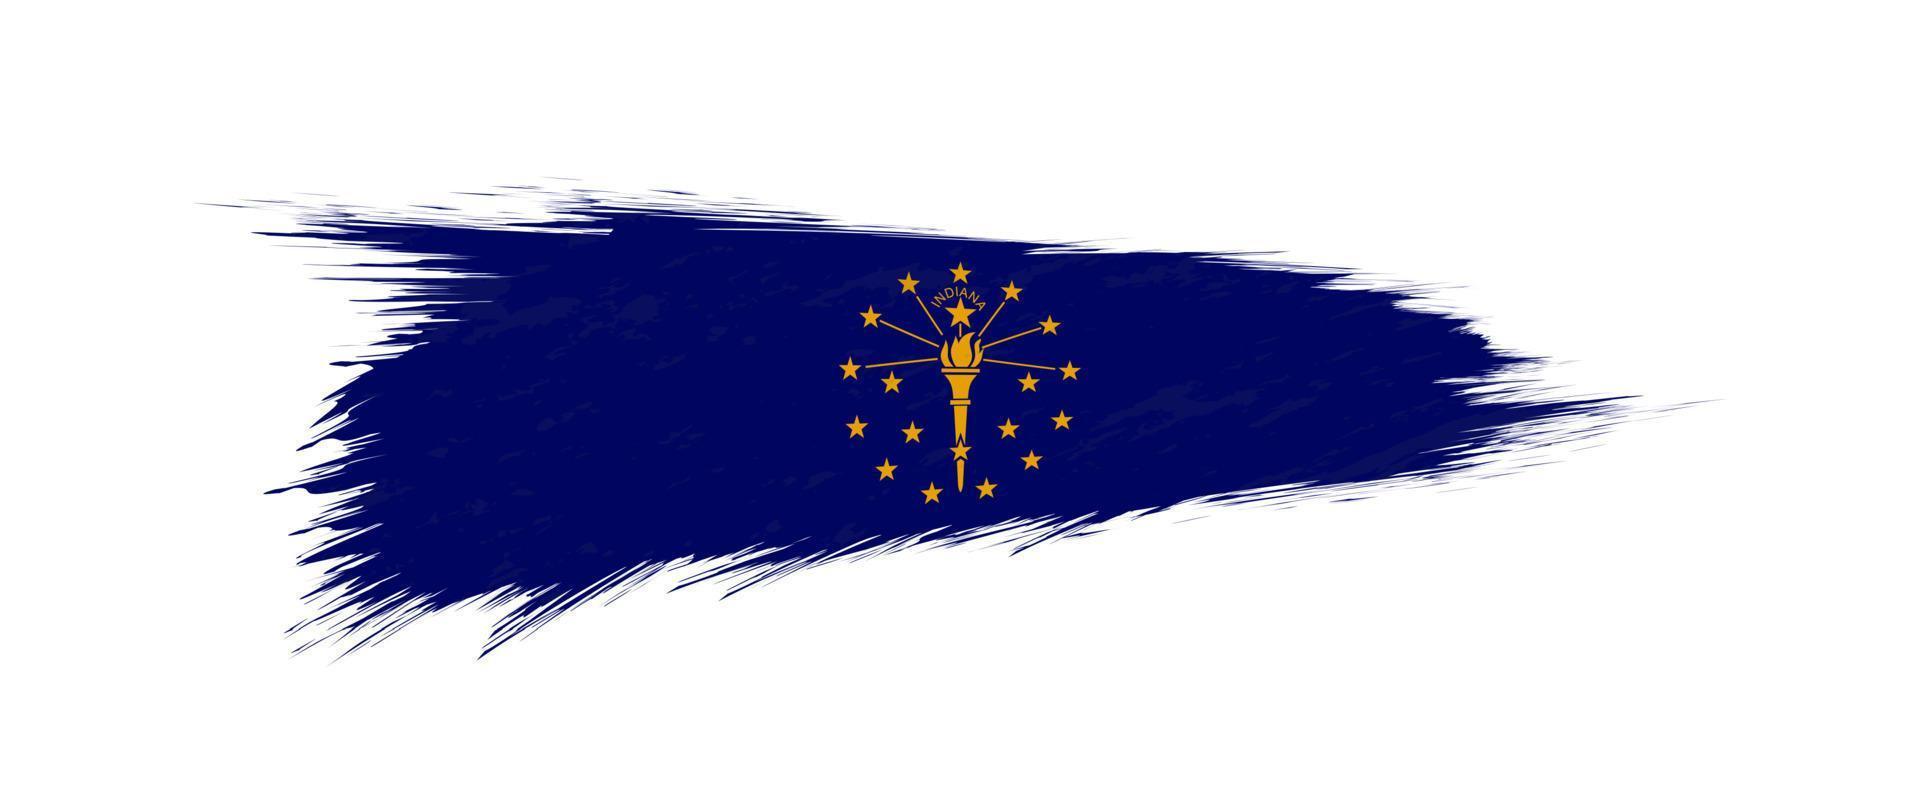 Flag of Indiana US State in grunge brush. vector